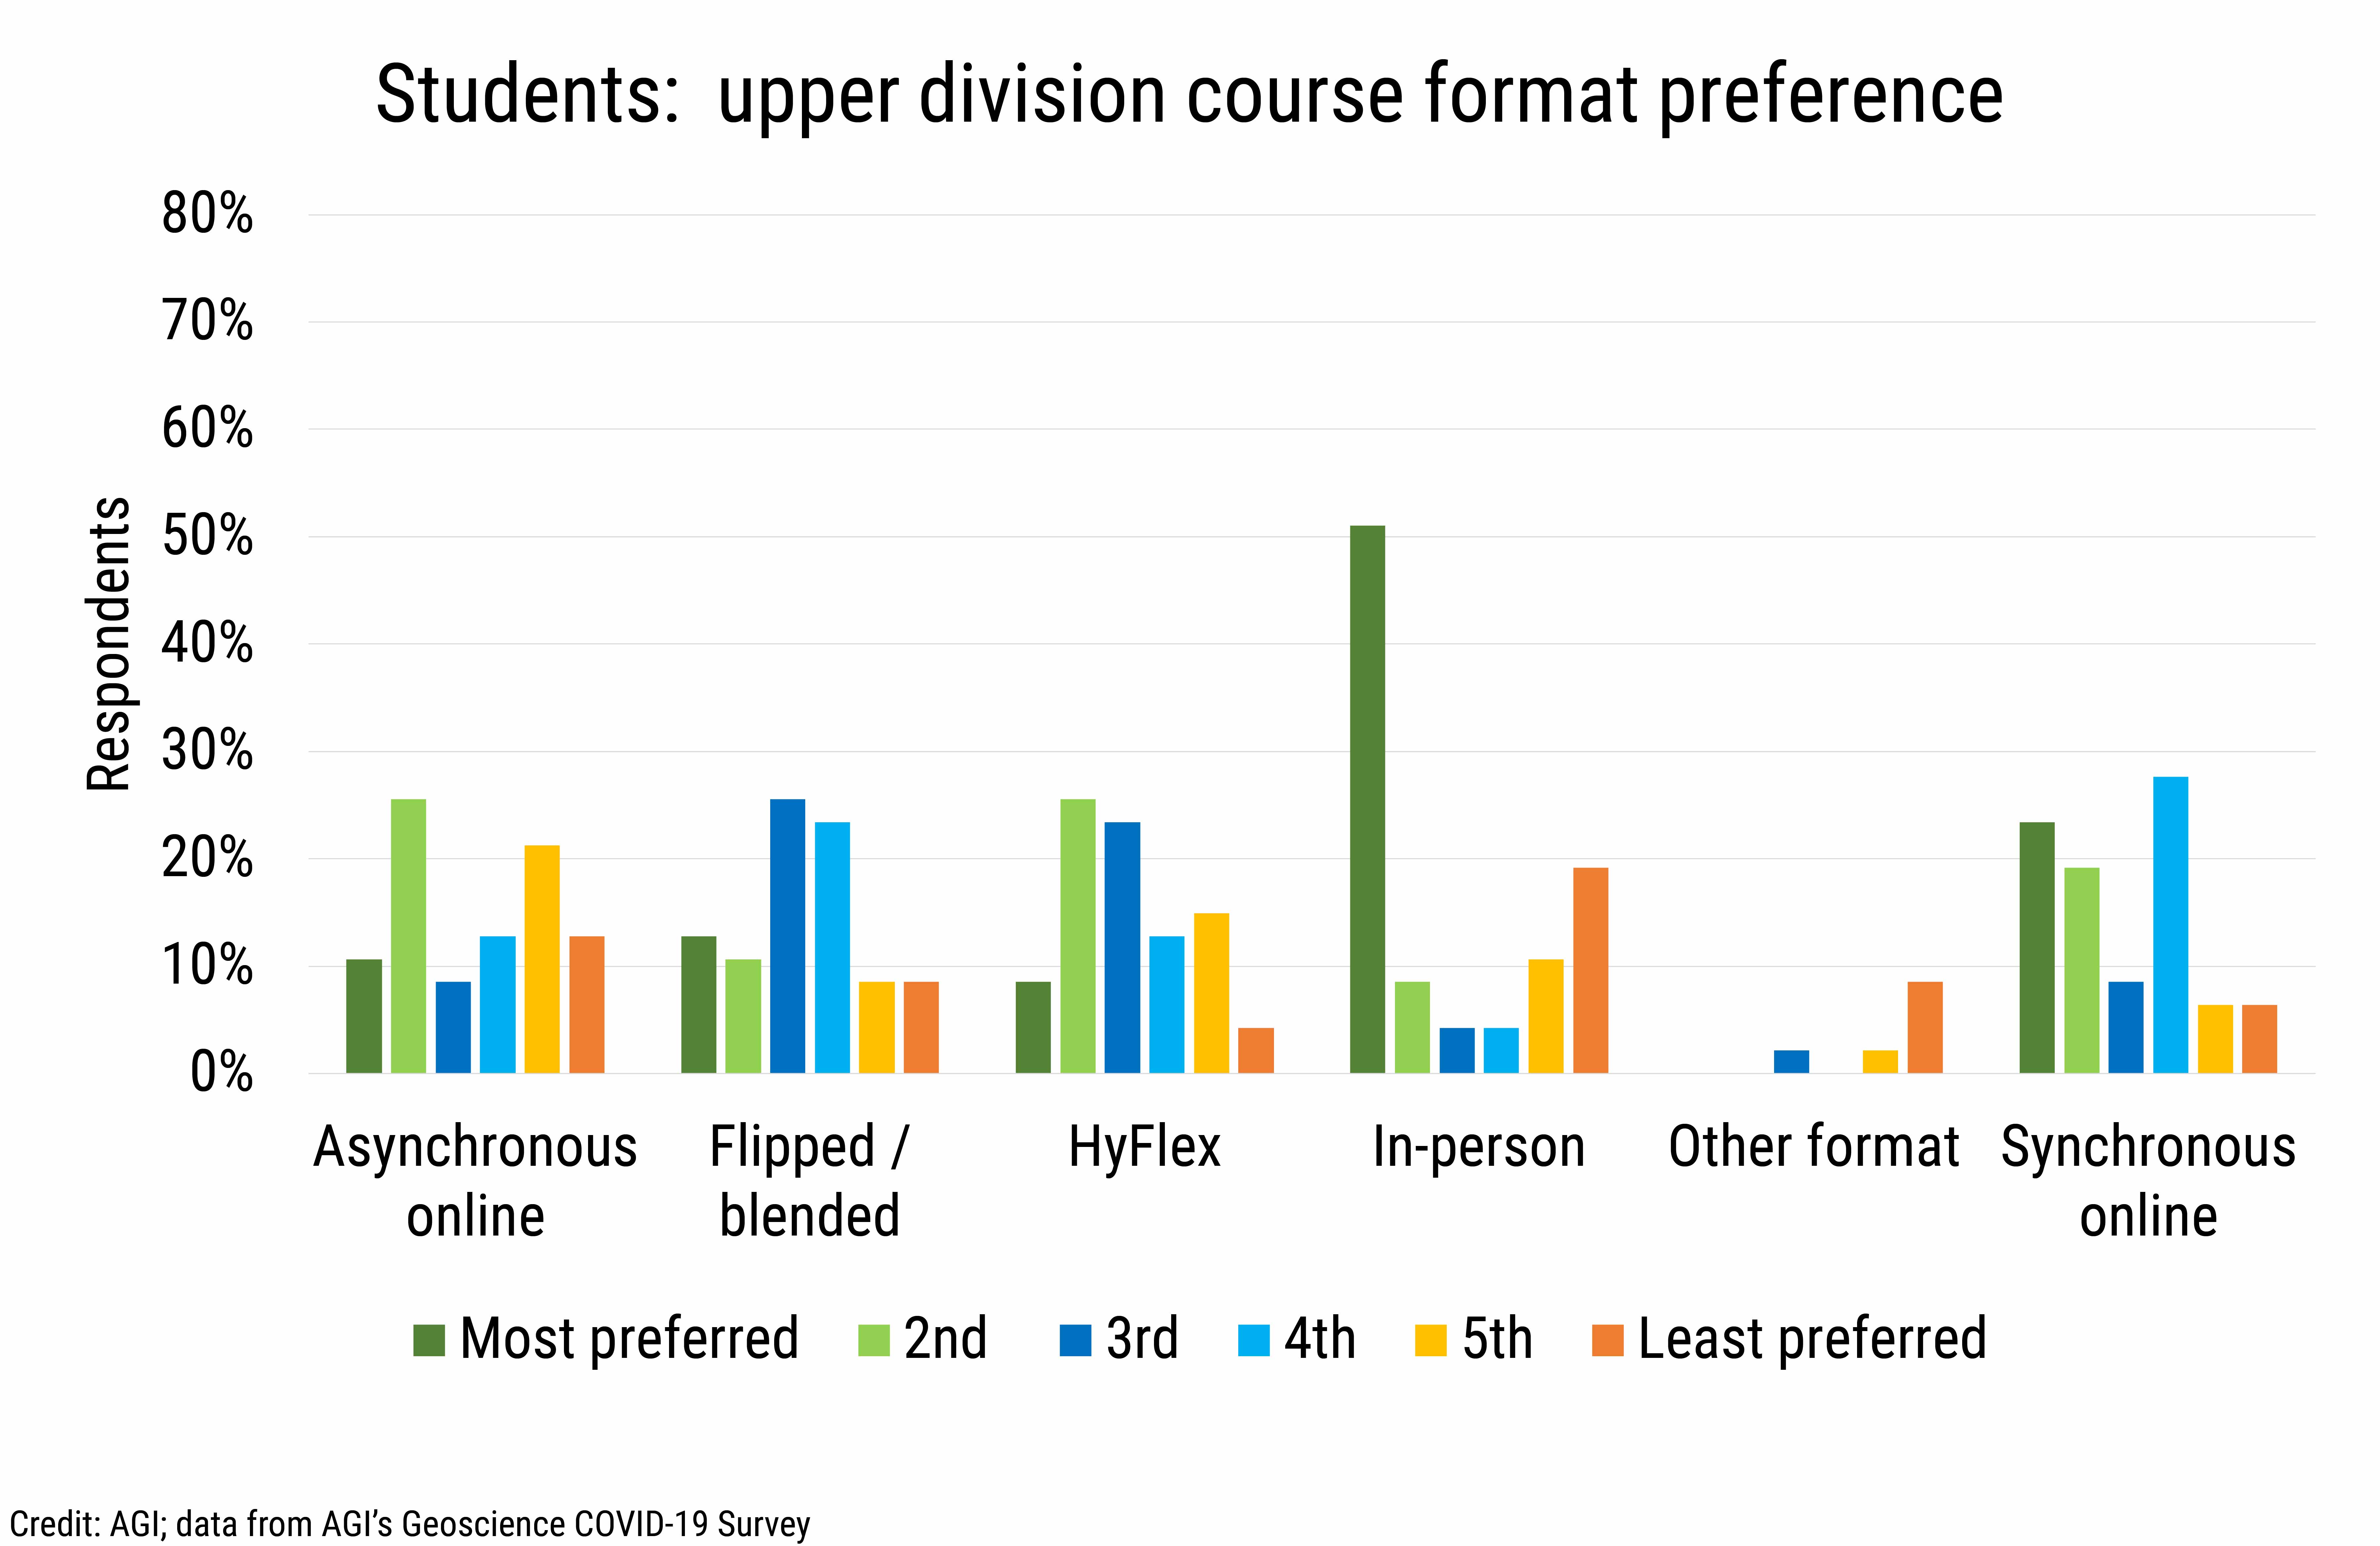 DB_2020-031 chart07 Students upper division course format preference (Credit: AGI; data from AGI's Geoscience COVID-19 Survey)